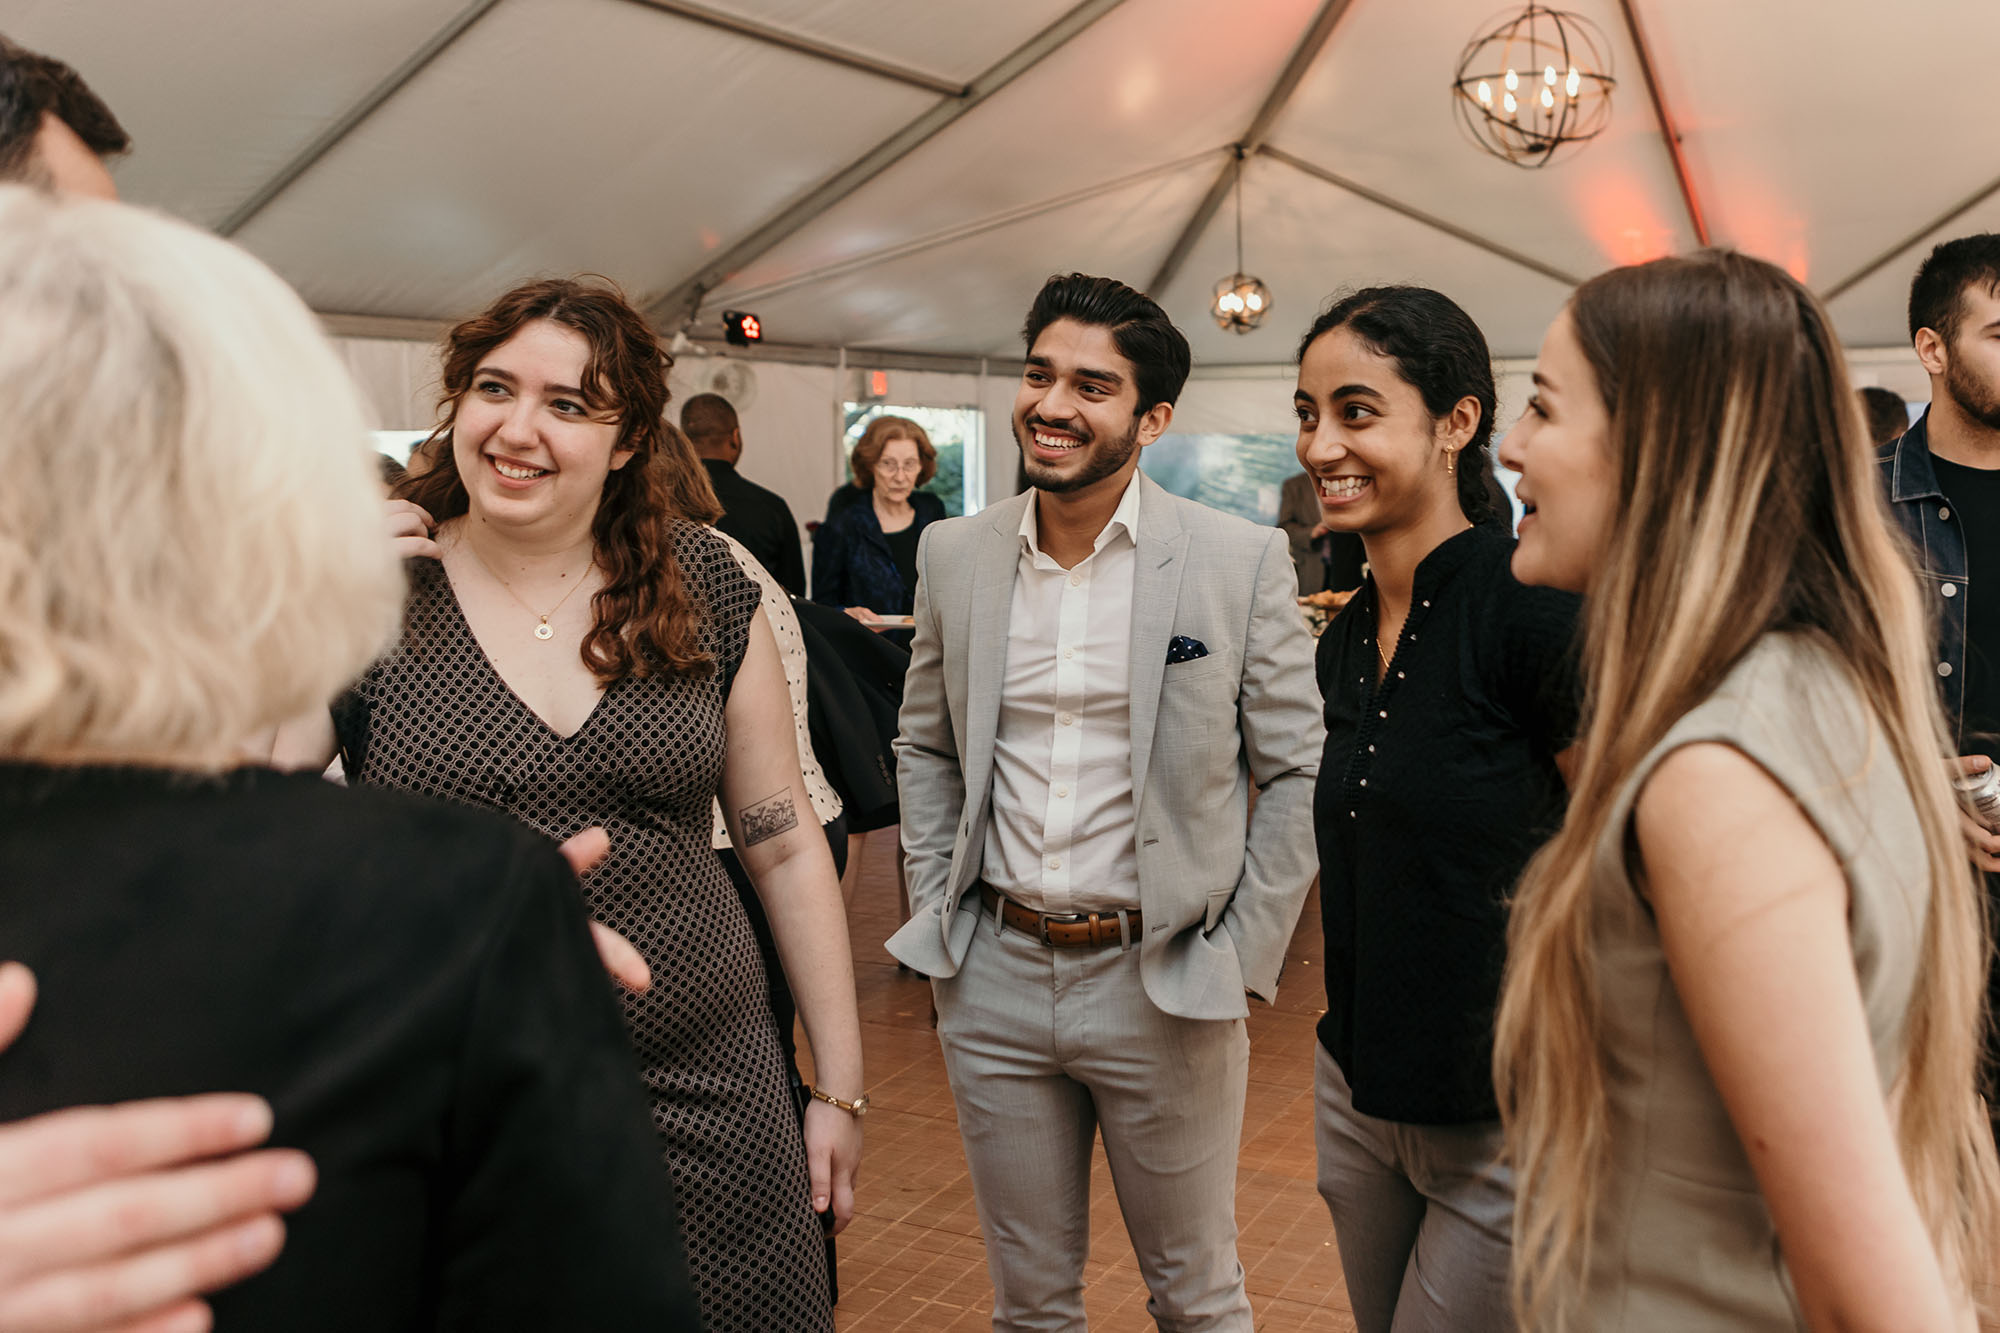 Photo: At the reception, Ilana Keusch (from left), chief justice of Student Government, Dhruv Kapadia, Student Government president, Navya Kotturu, Student Government executive vice president, and Hanna Dworkin, Student Government senate chair. A small group of young adults wearing business casual attire smile as they mingle at a reception.